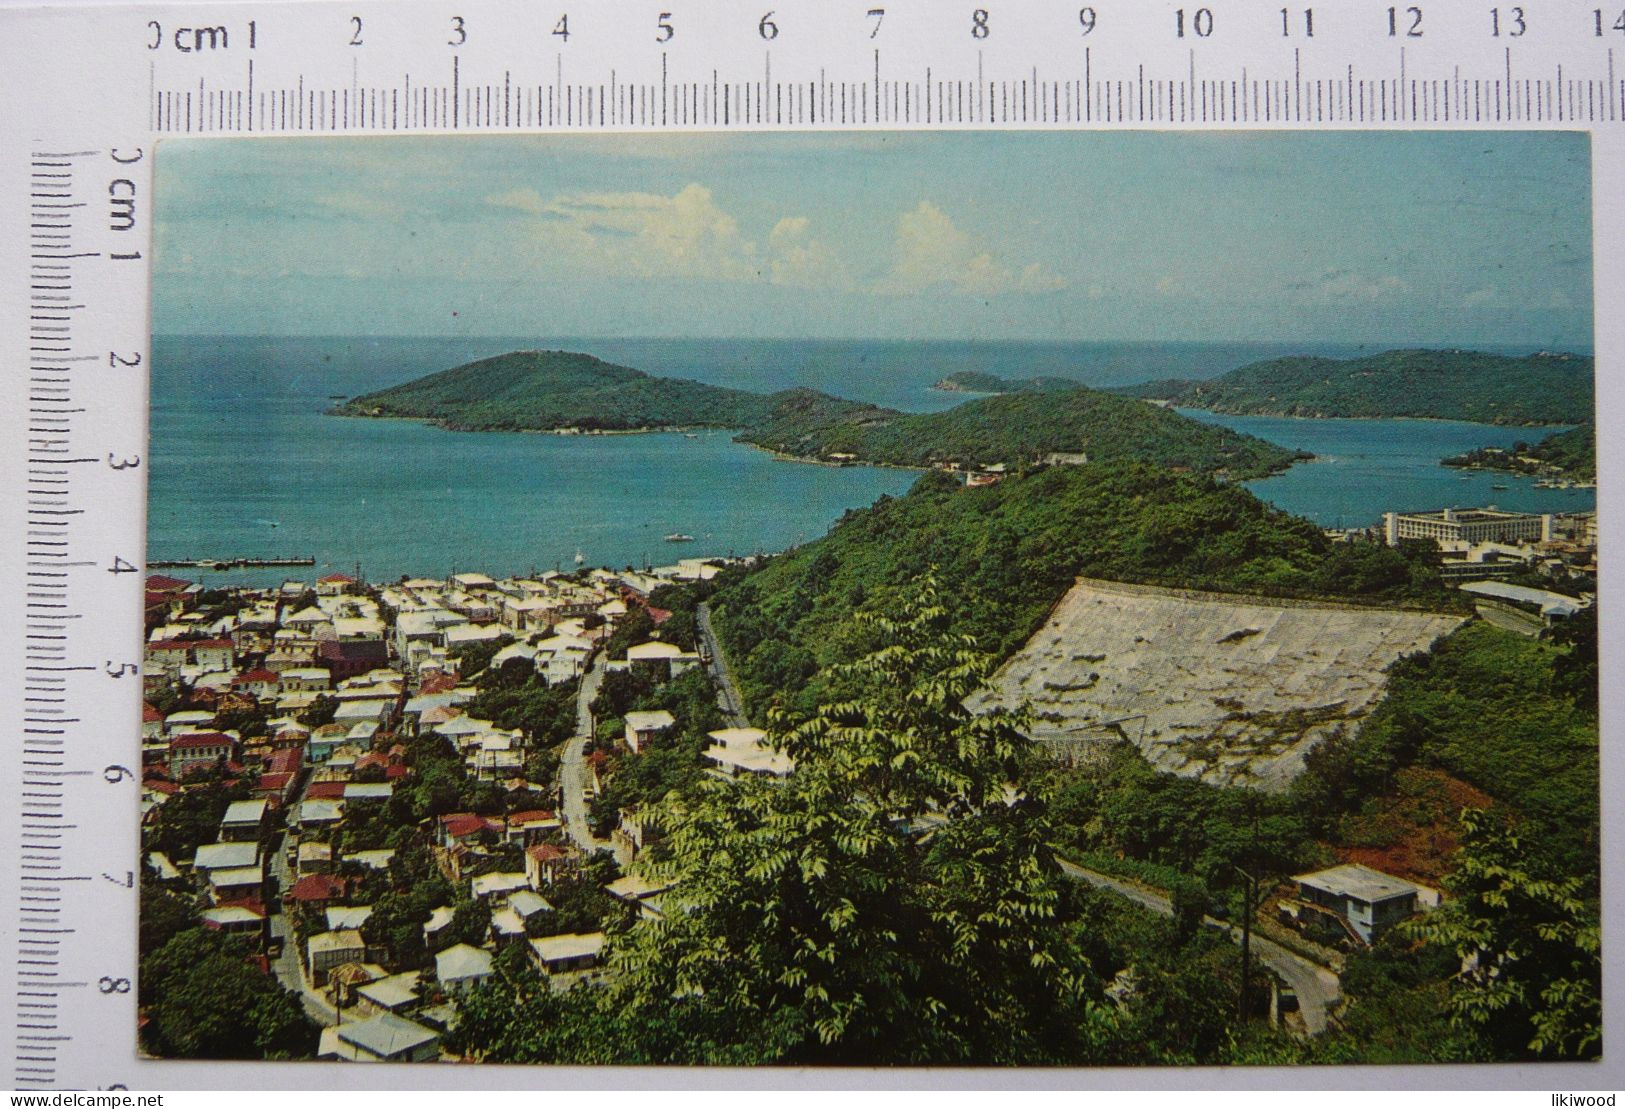 Charlotte Amalie Harbor, With Hassel And Water Islands Offshore, St.Thomas - Virgin Islands - Virgin Islands, US